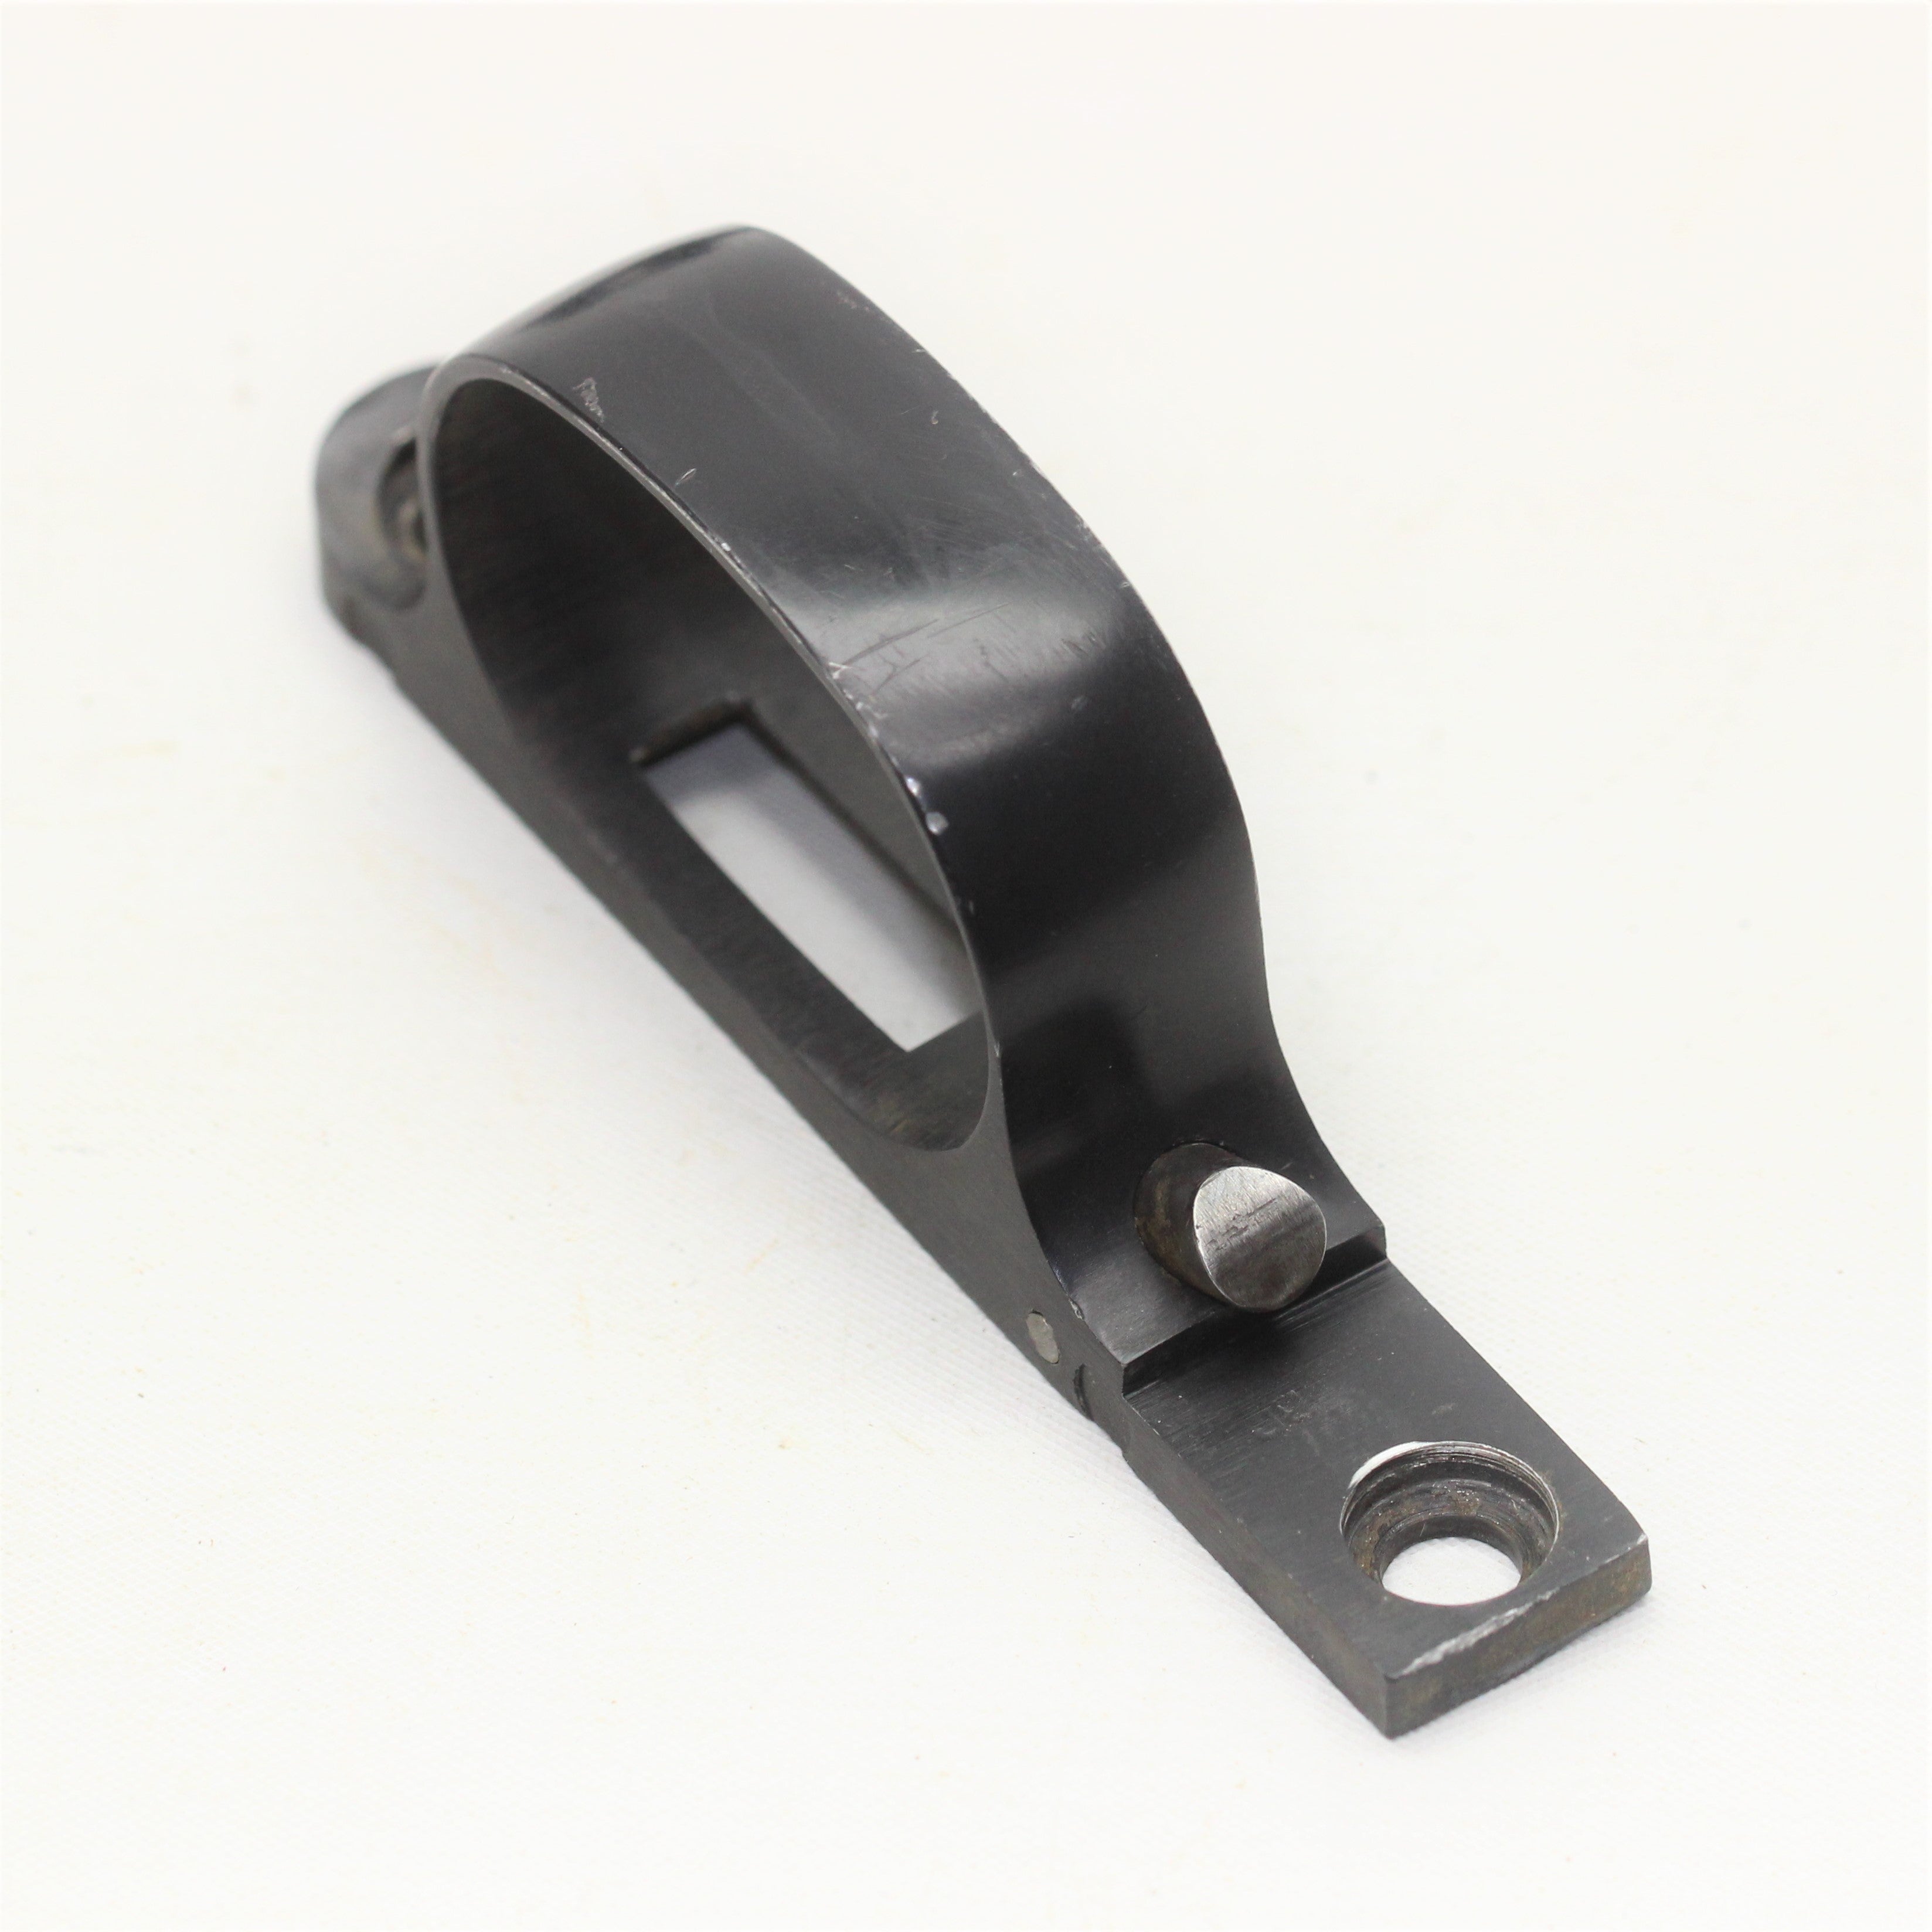 Featherweight Trigger Guard - Special Bulk Sale